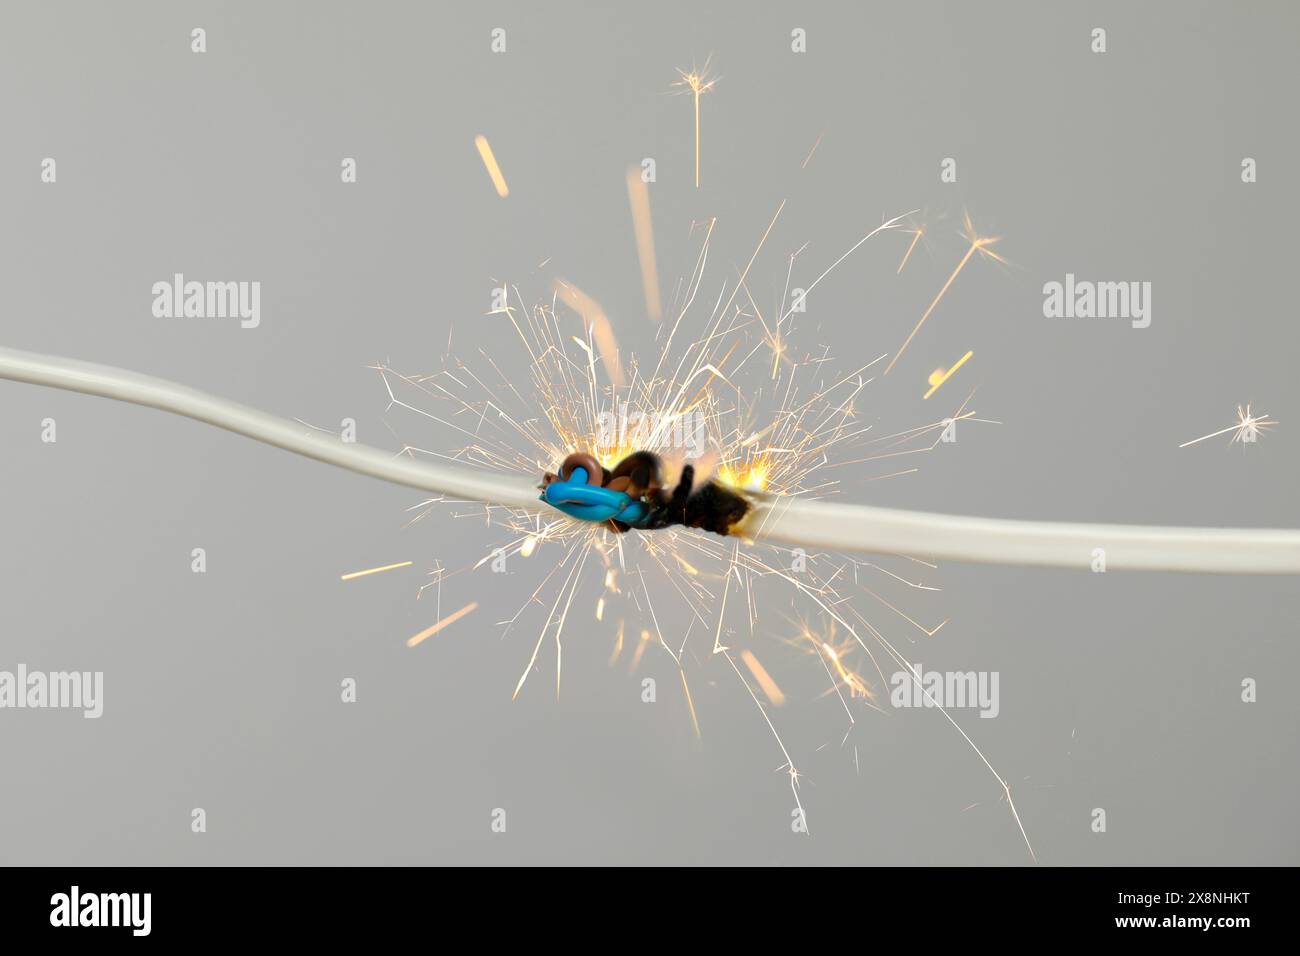 Sparking electrical wire on light background, closeup Stock Photo